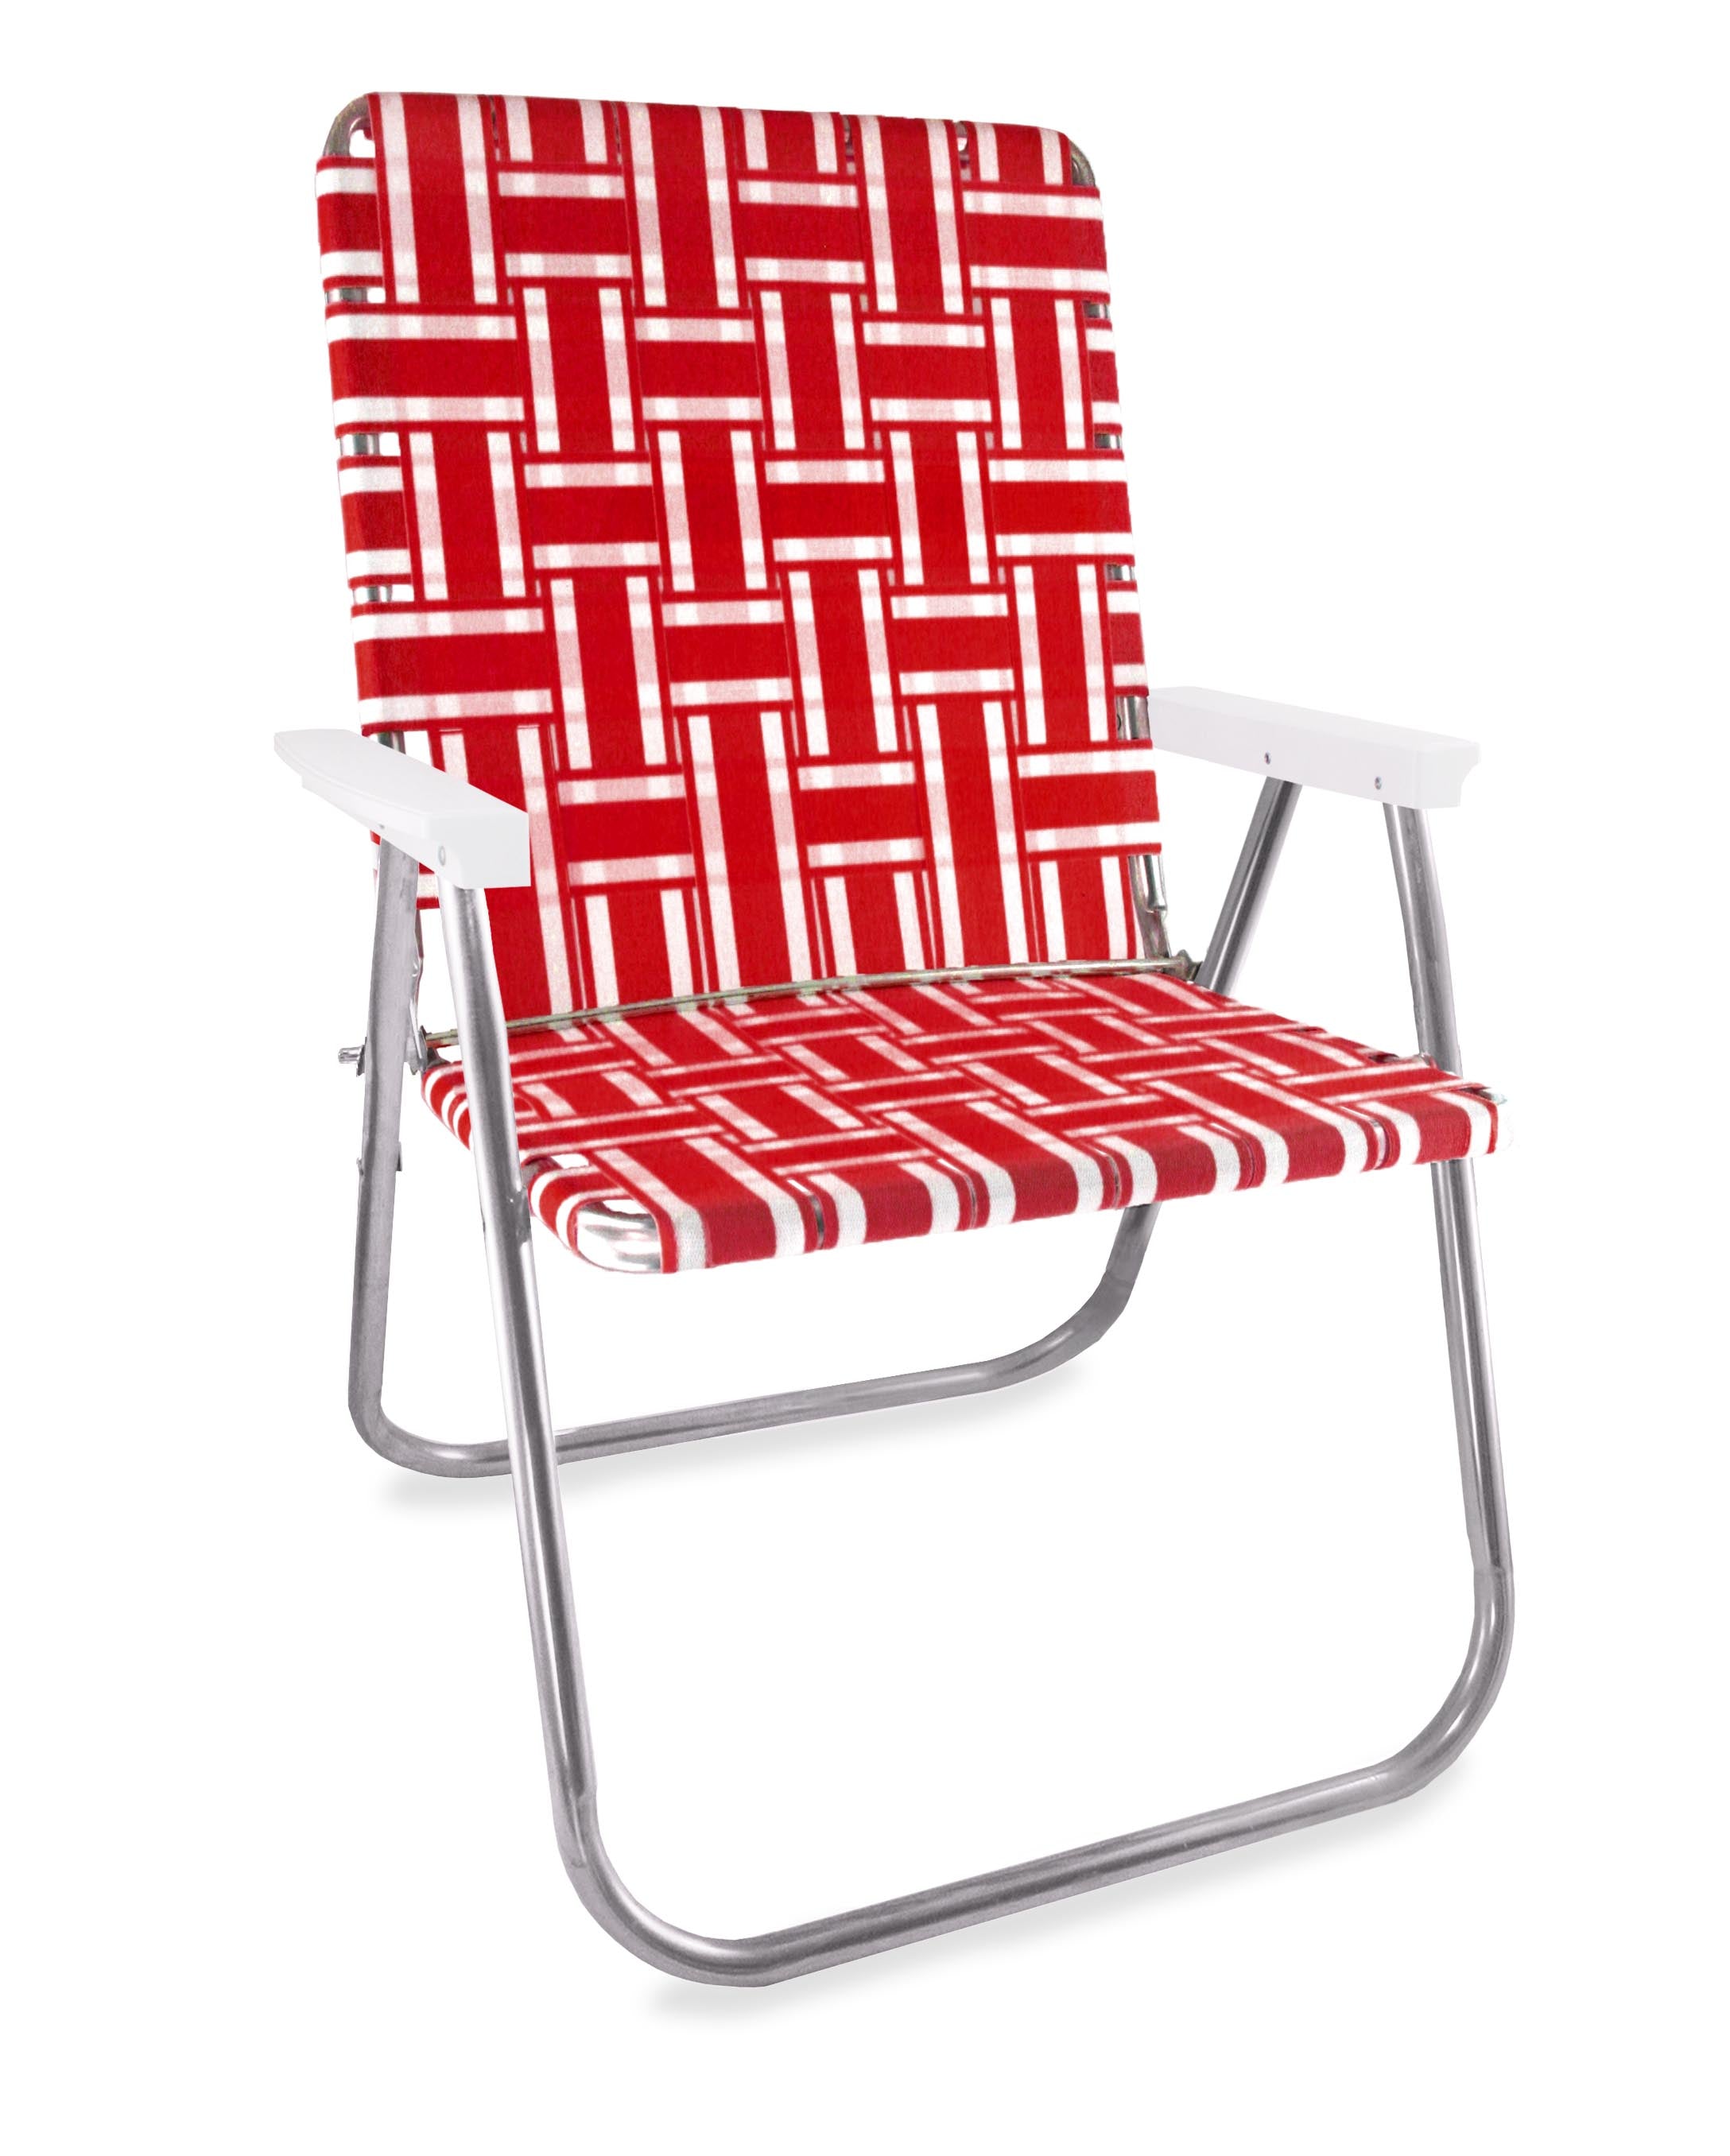 webbed aluminum lawn chairs